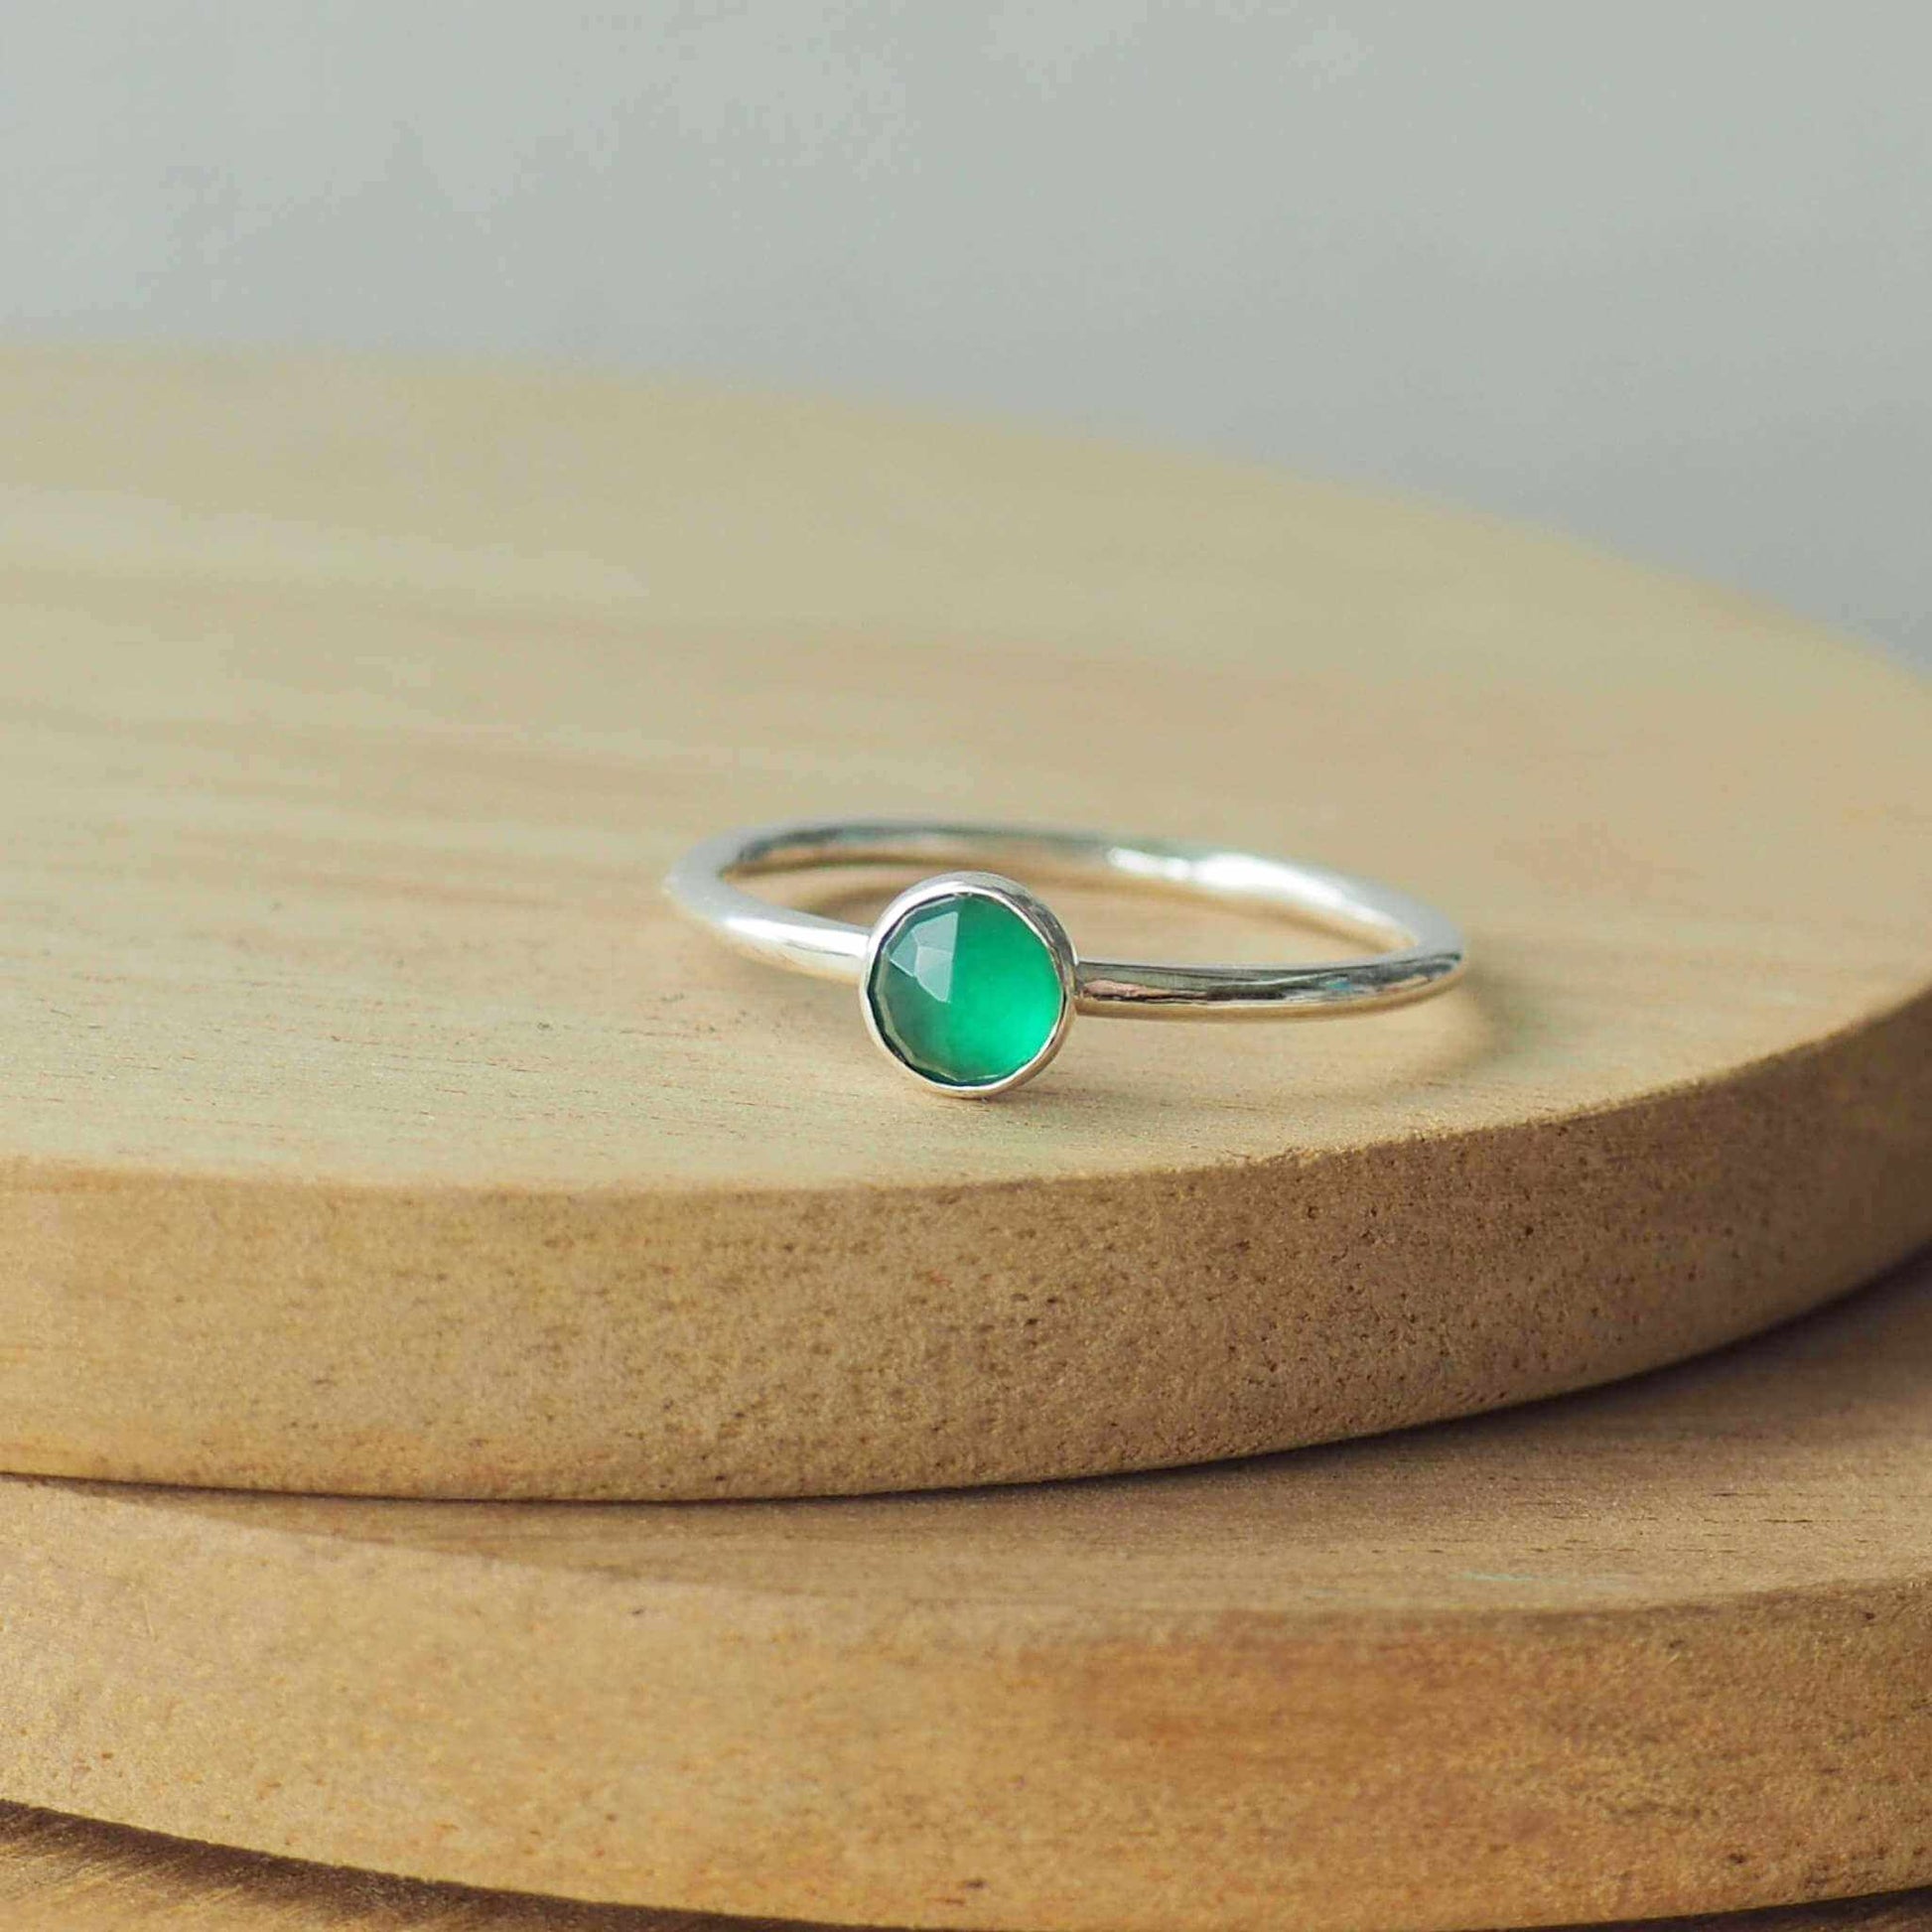 Green Agate Facet Cut Ring. A 5mm round cabochon emerald Green Agate, birthstone for May  set very simply onto a round band of sterling silver. handmade by maram jewellery in Scotland